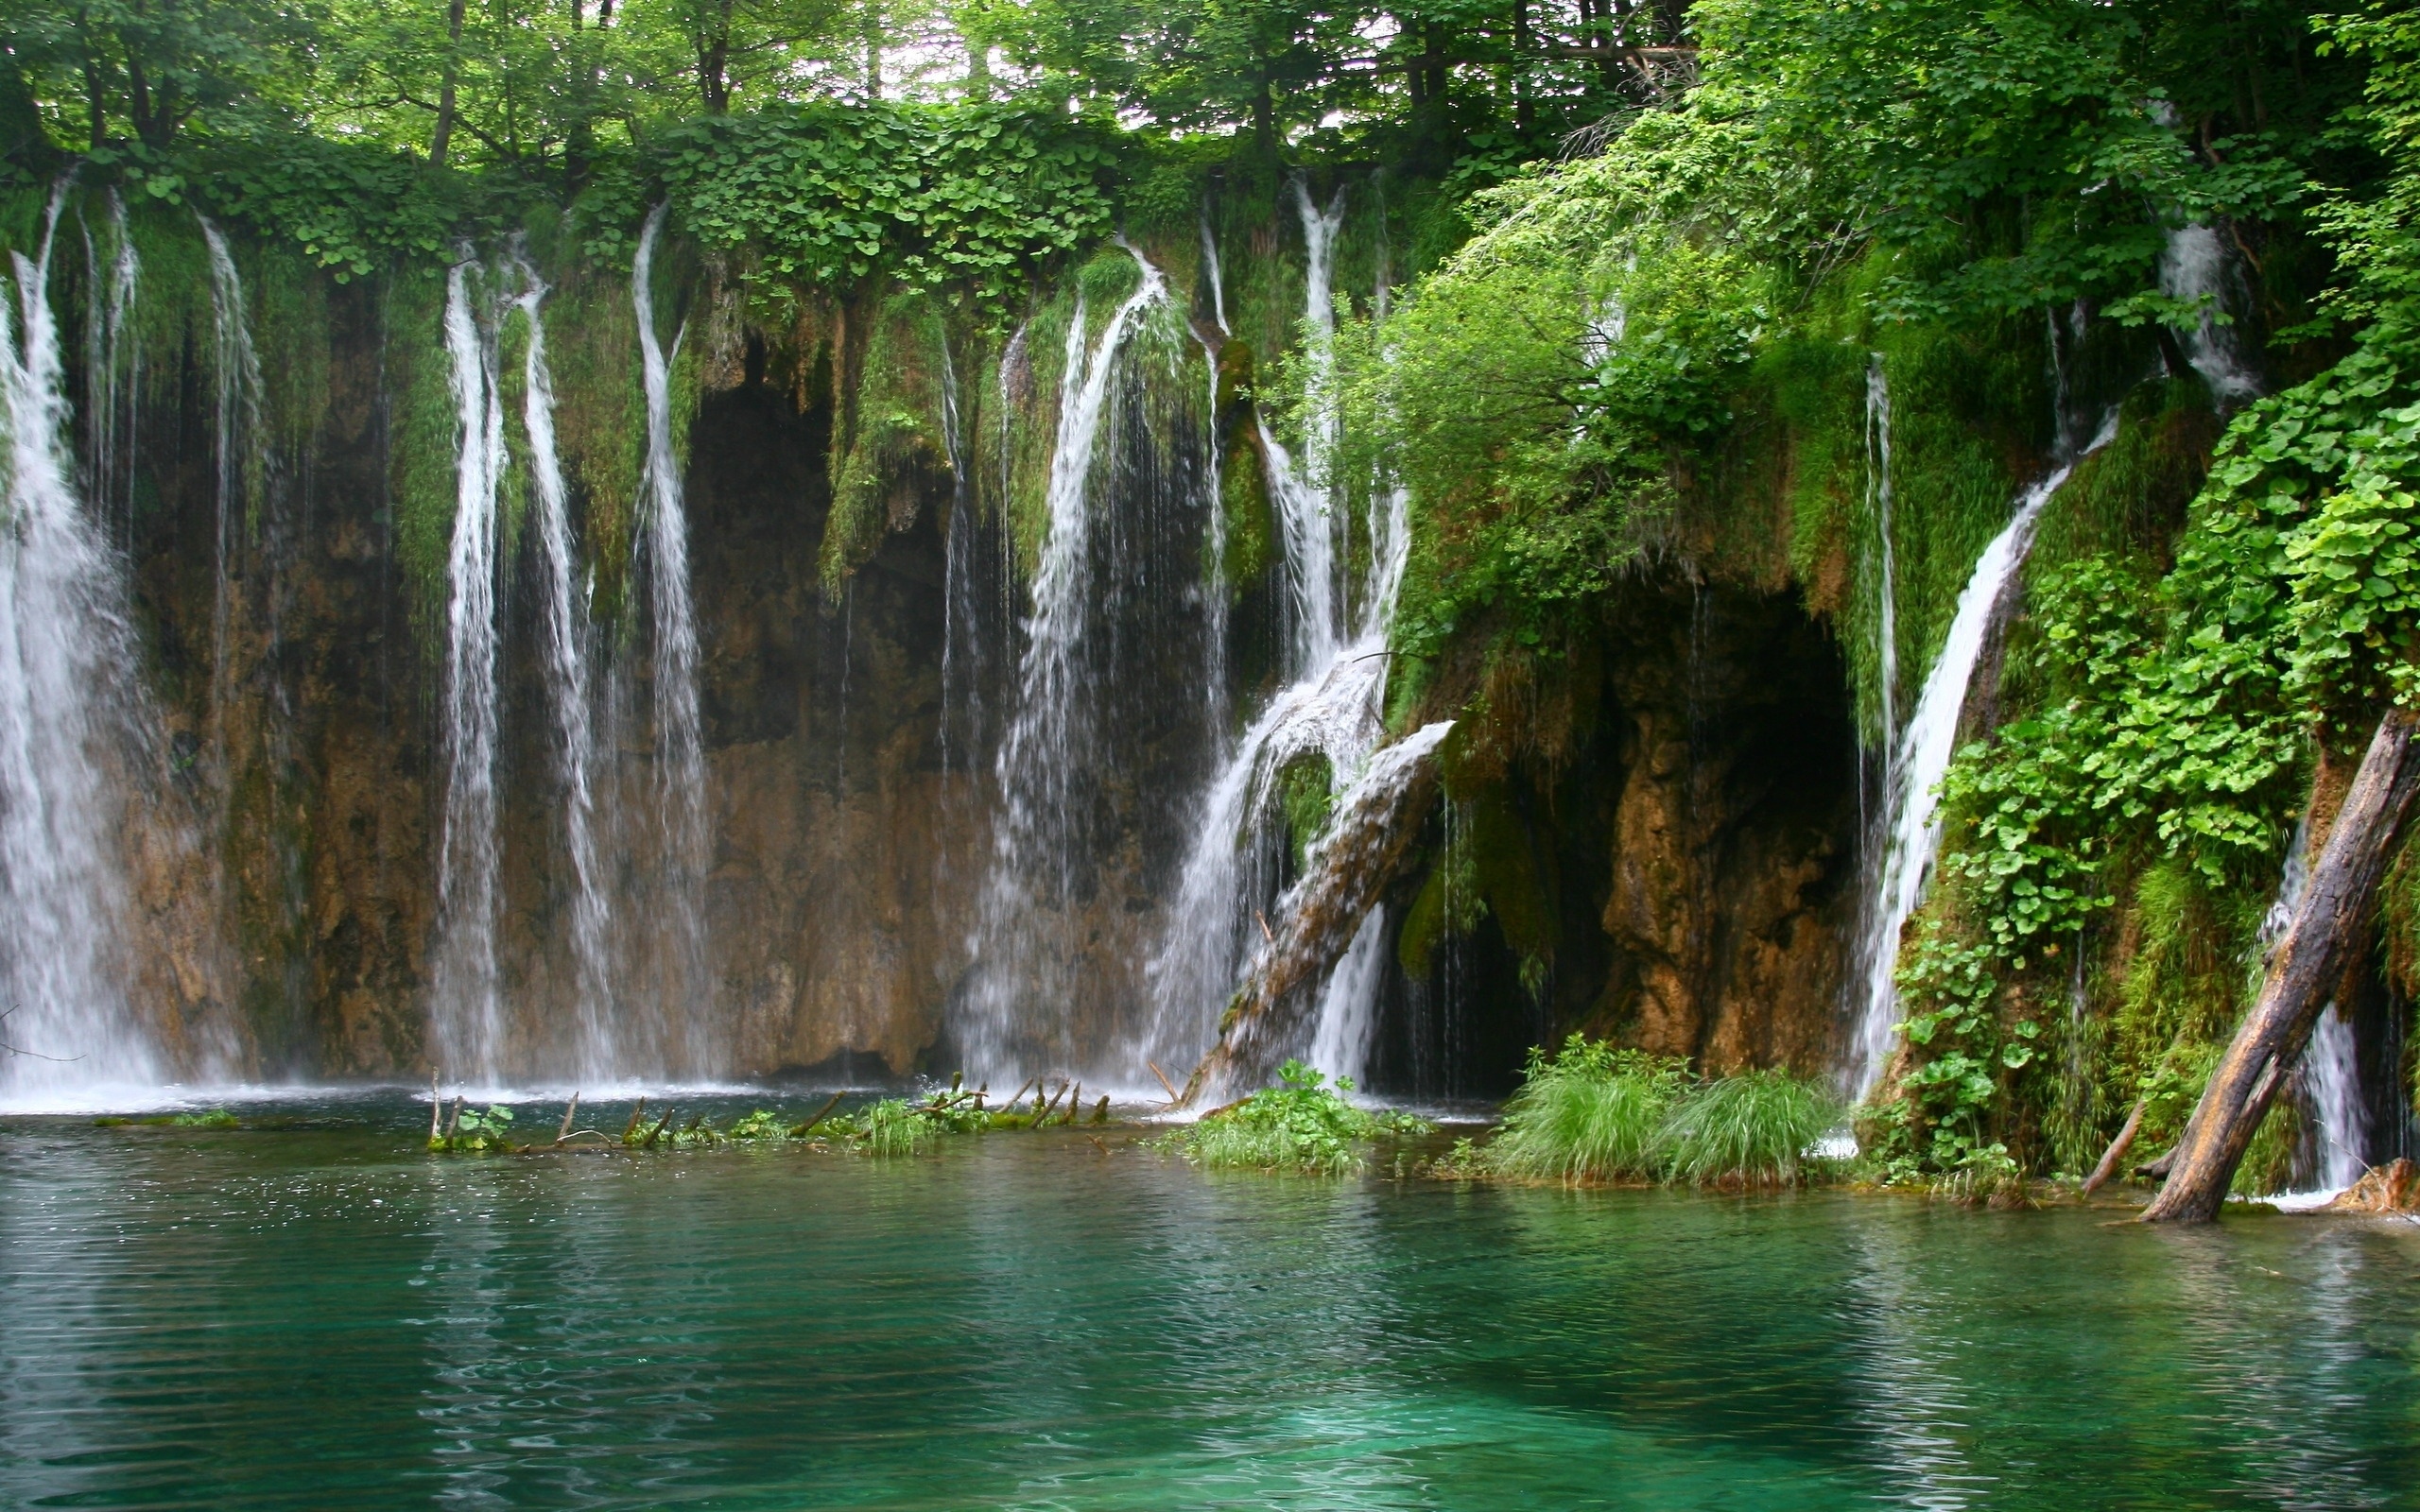 Plitvice Lakes National Park, Download now, High-quality images, Picture-perfect beauty, 2560x1600 HD Desktop